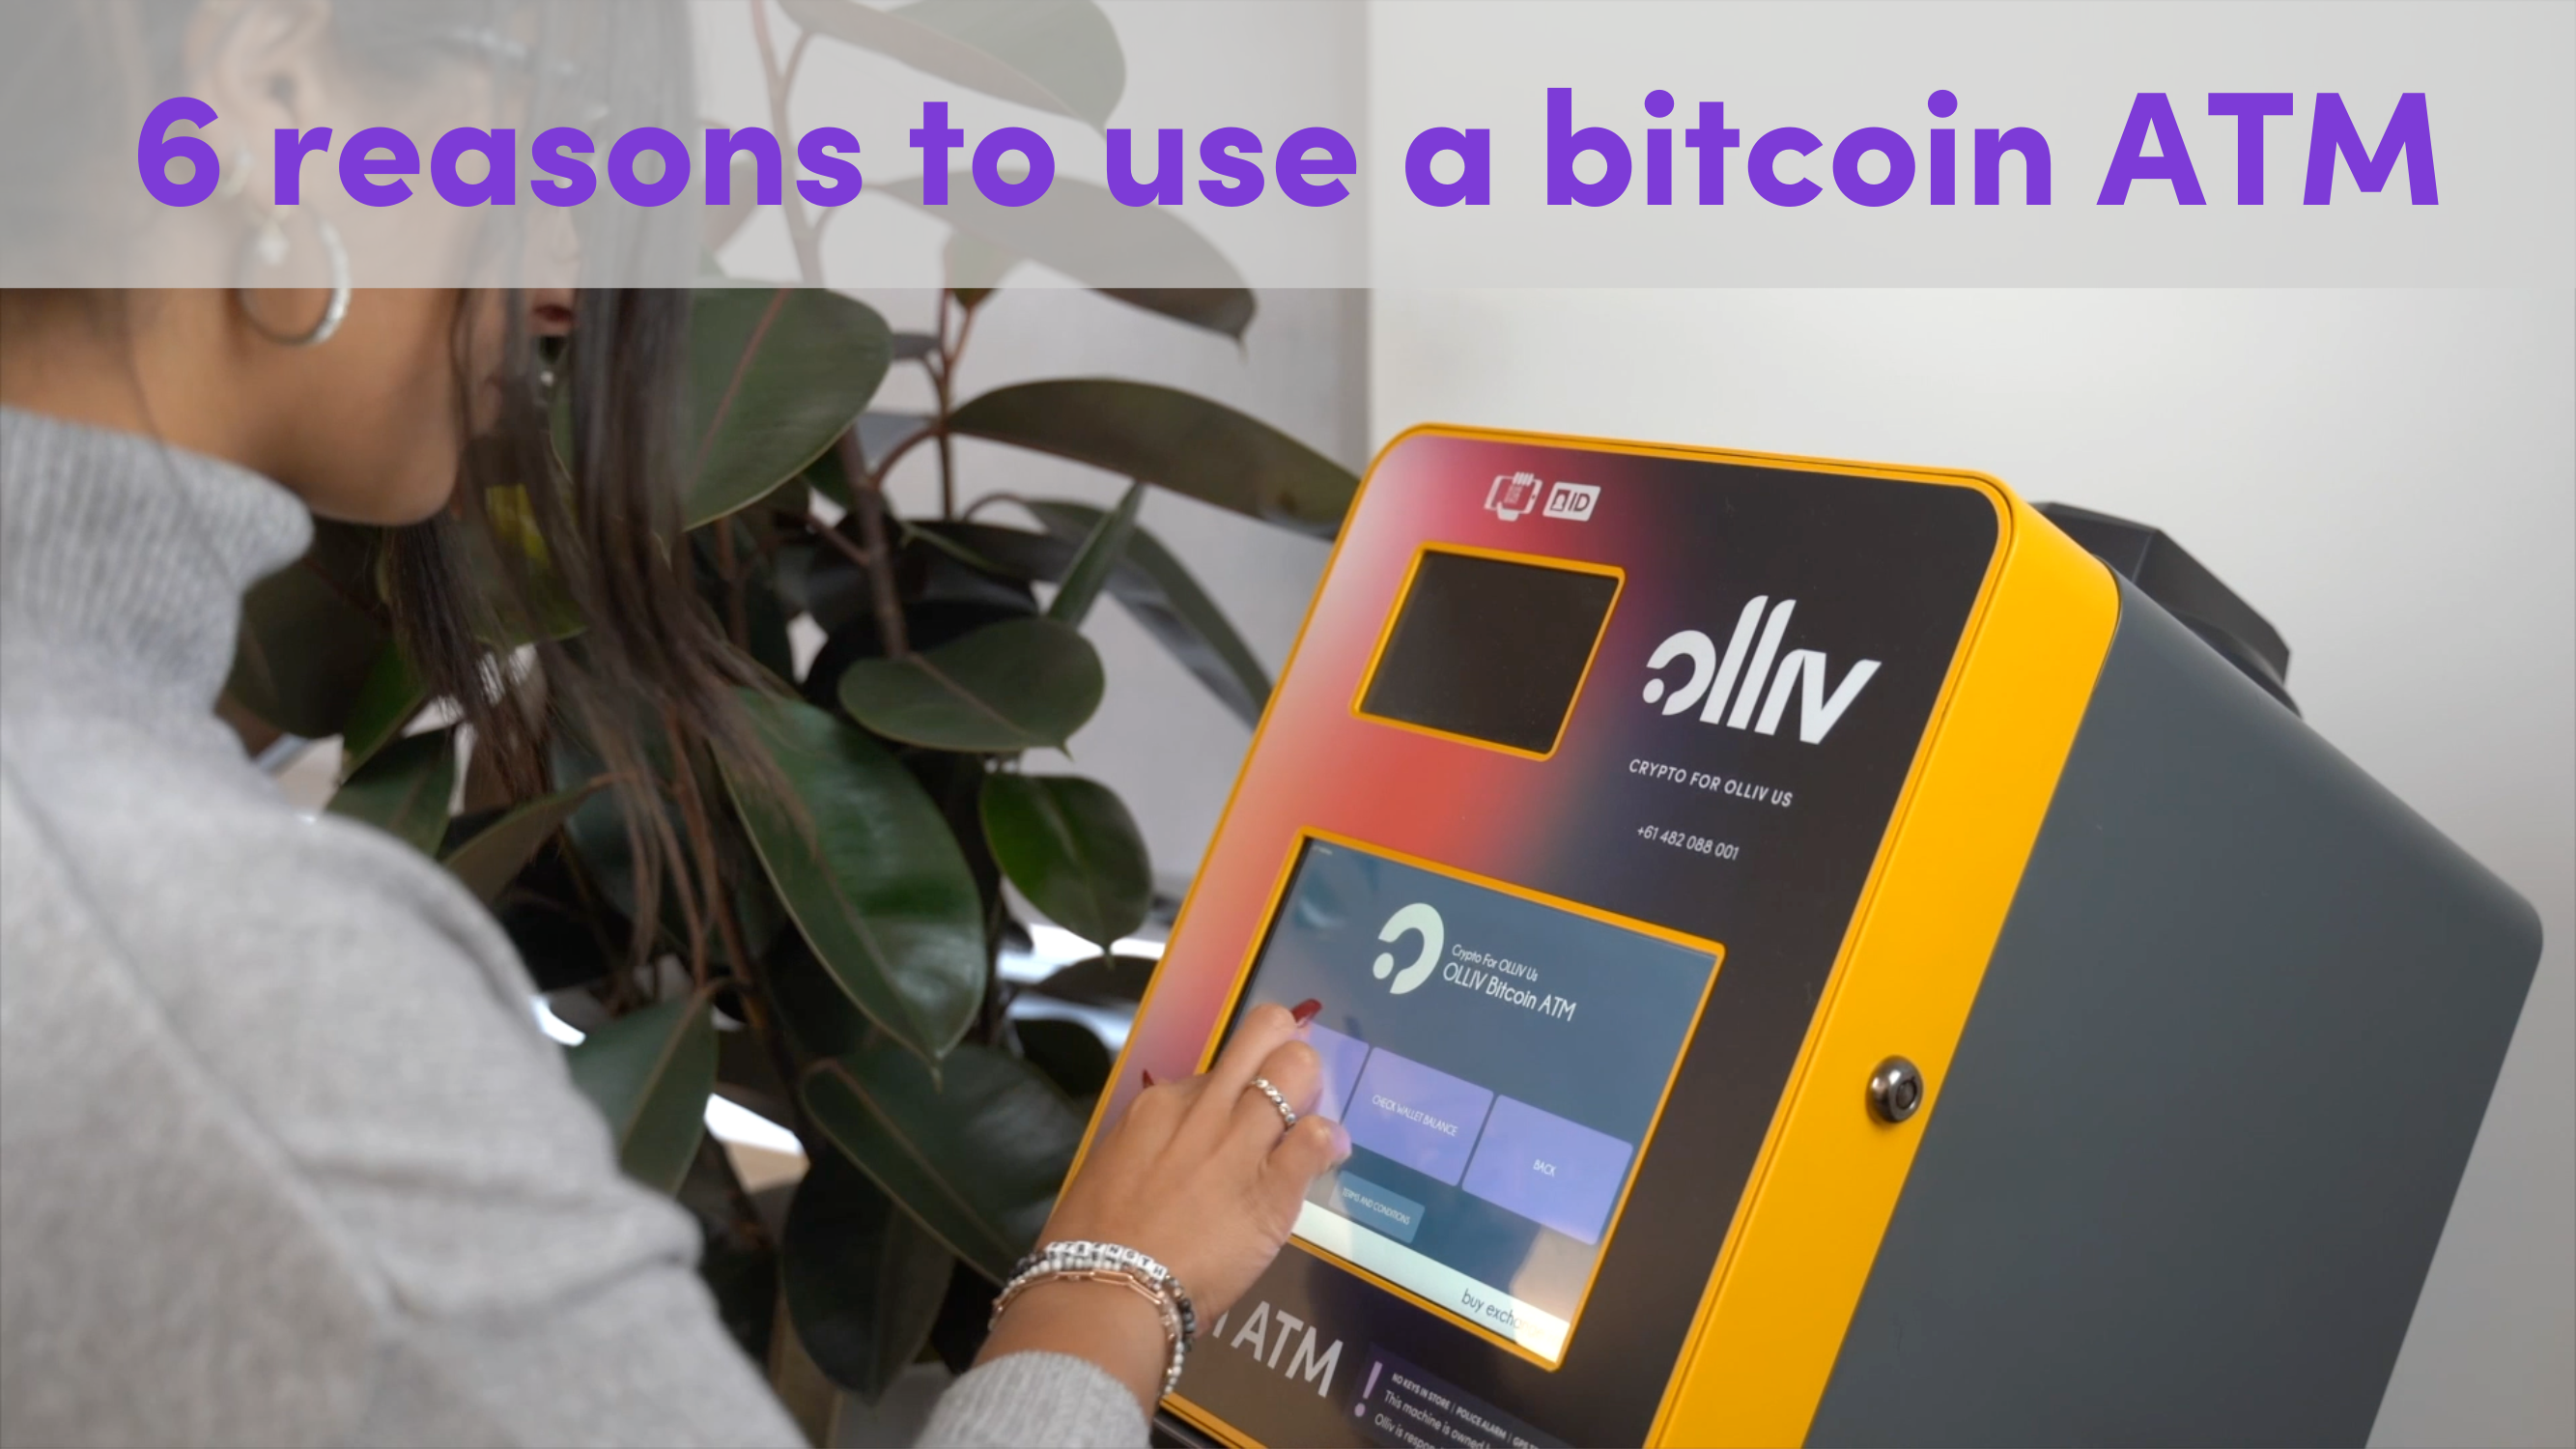 here are 6 reasons to use a bitcoin ATM